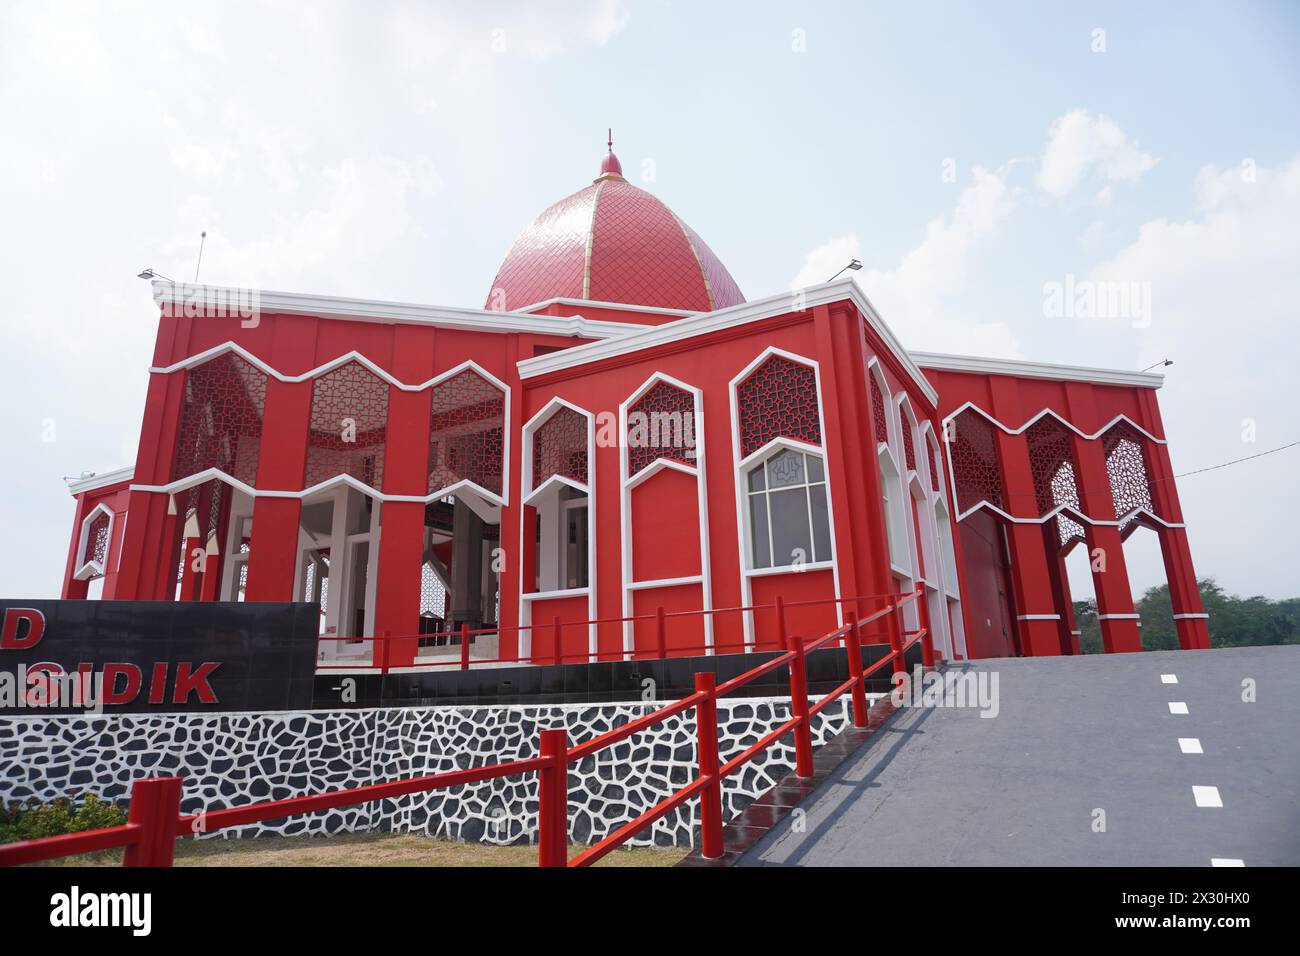 The Moekhlas Sidik Mosque is often referred to as the red mosque in Pandaan, Indonesia Stock Photo